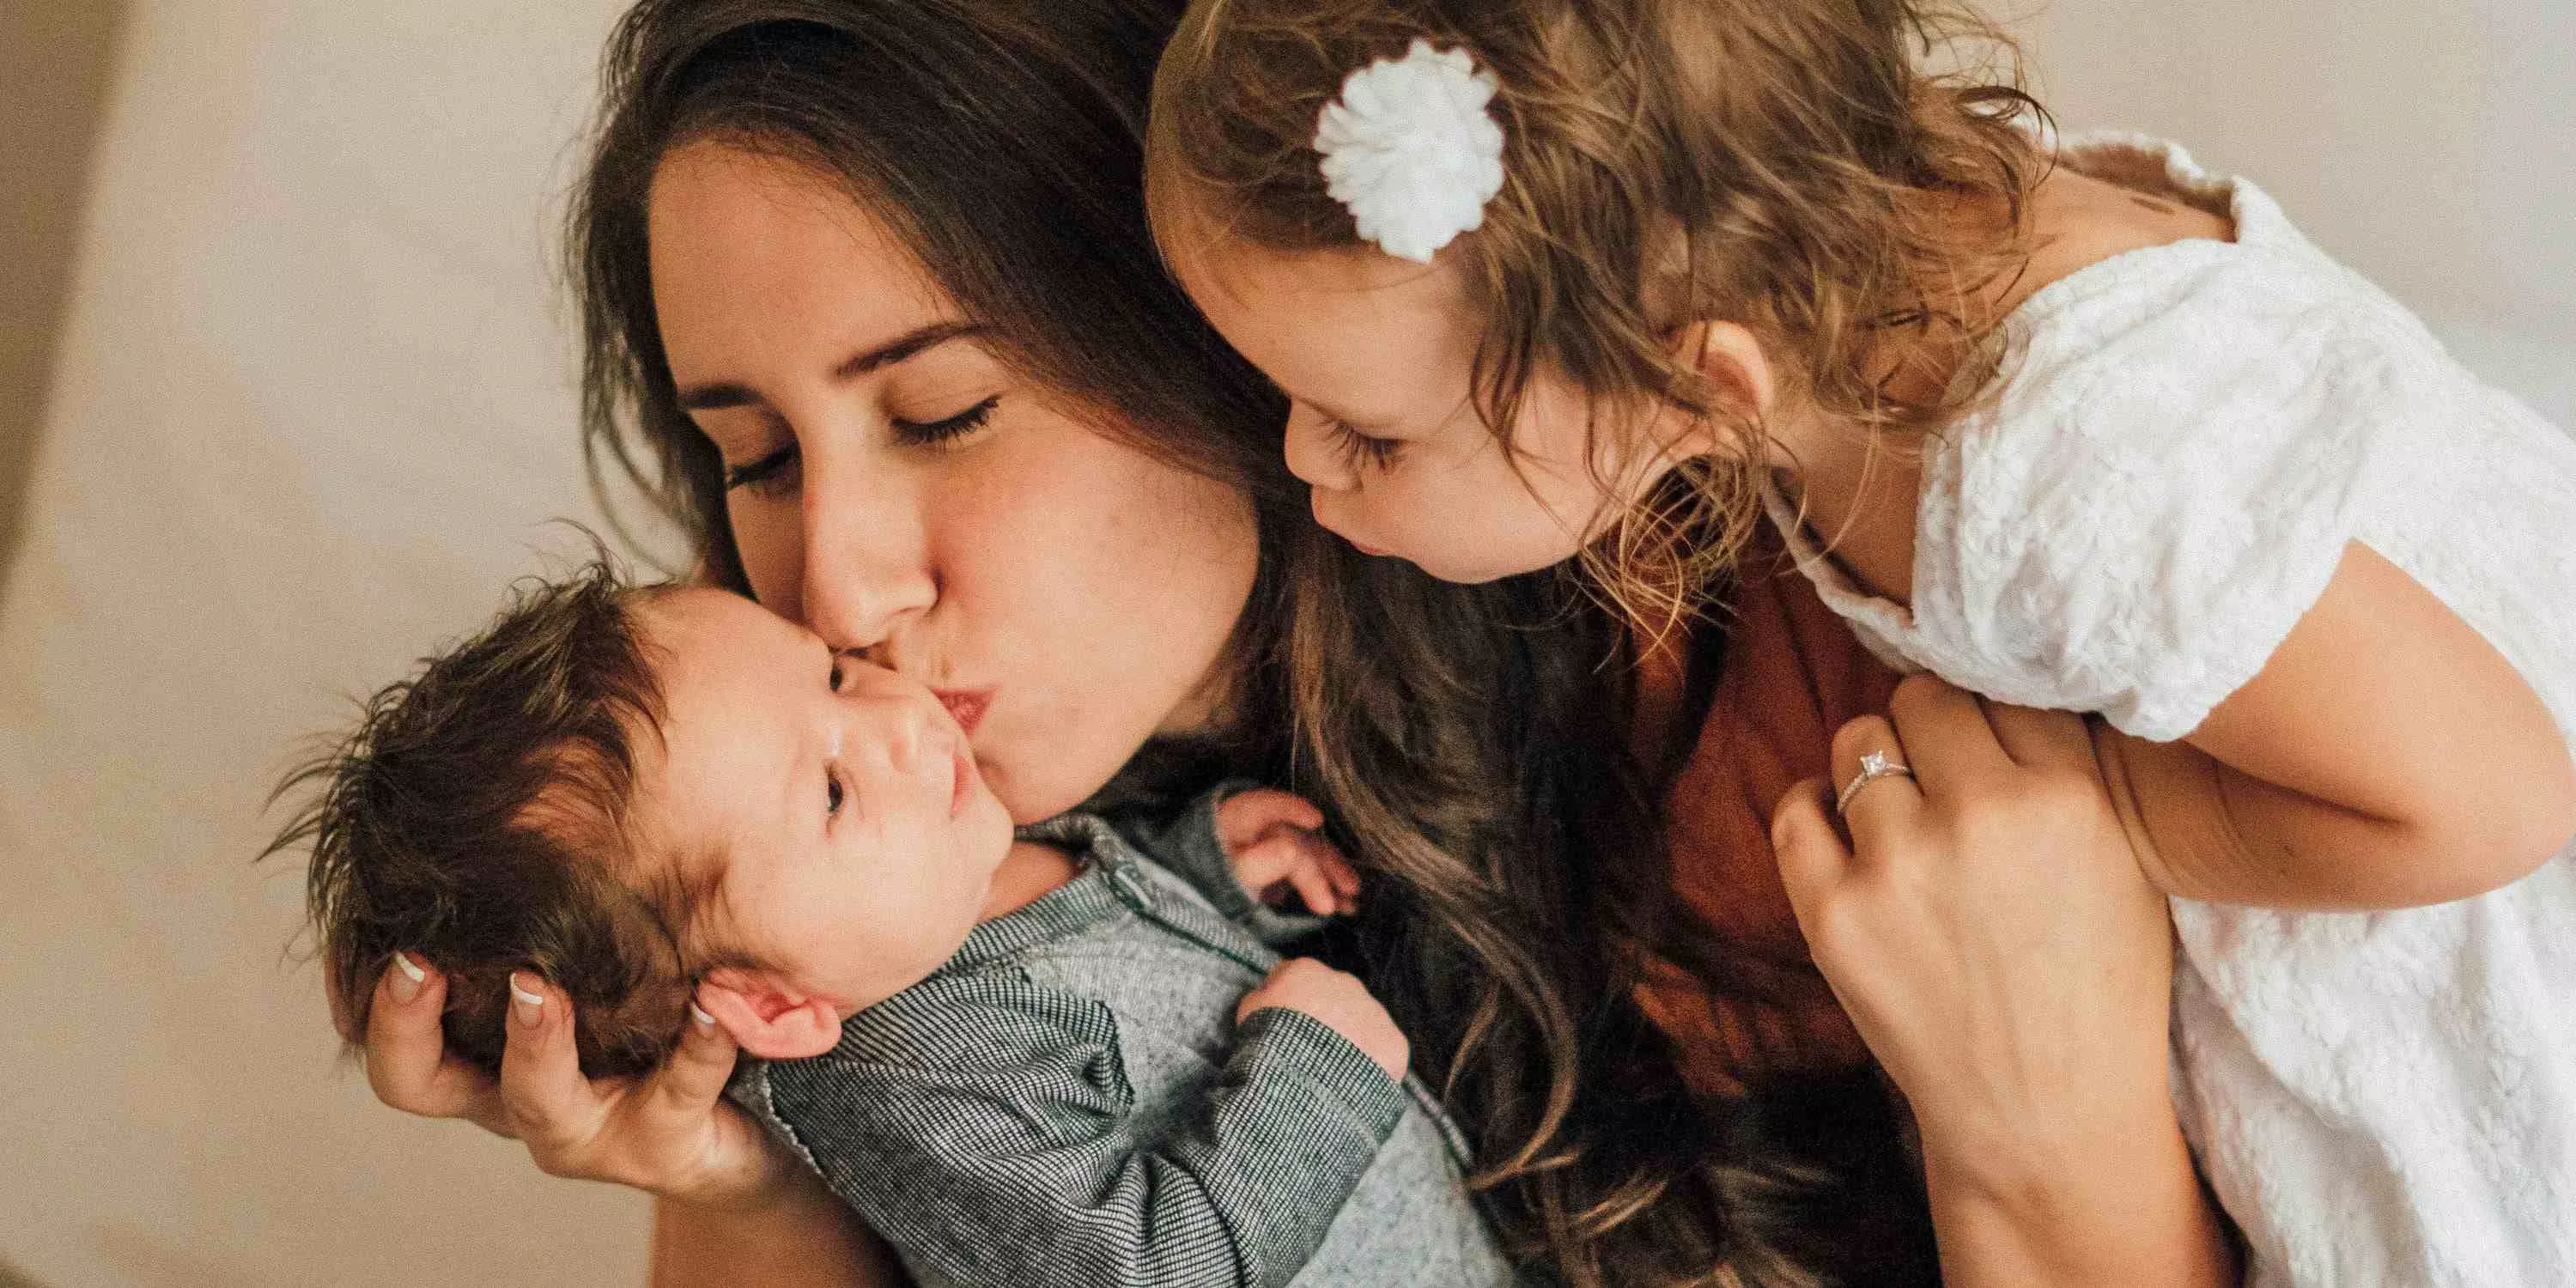 Mother holds newborn in her arms and kisses it on the cheek, sibling stands next to mother and blows a kiss at the baby